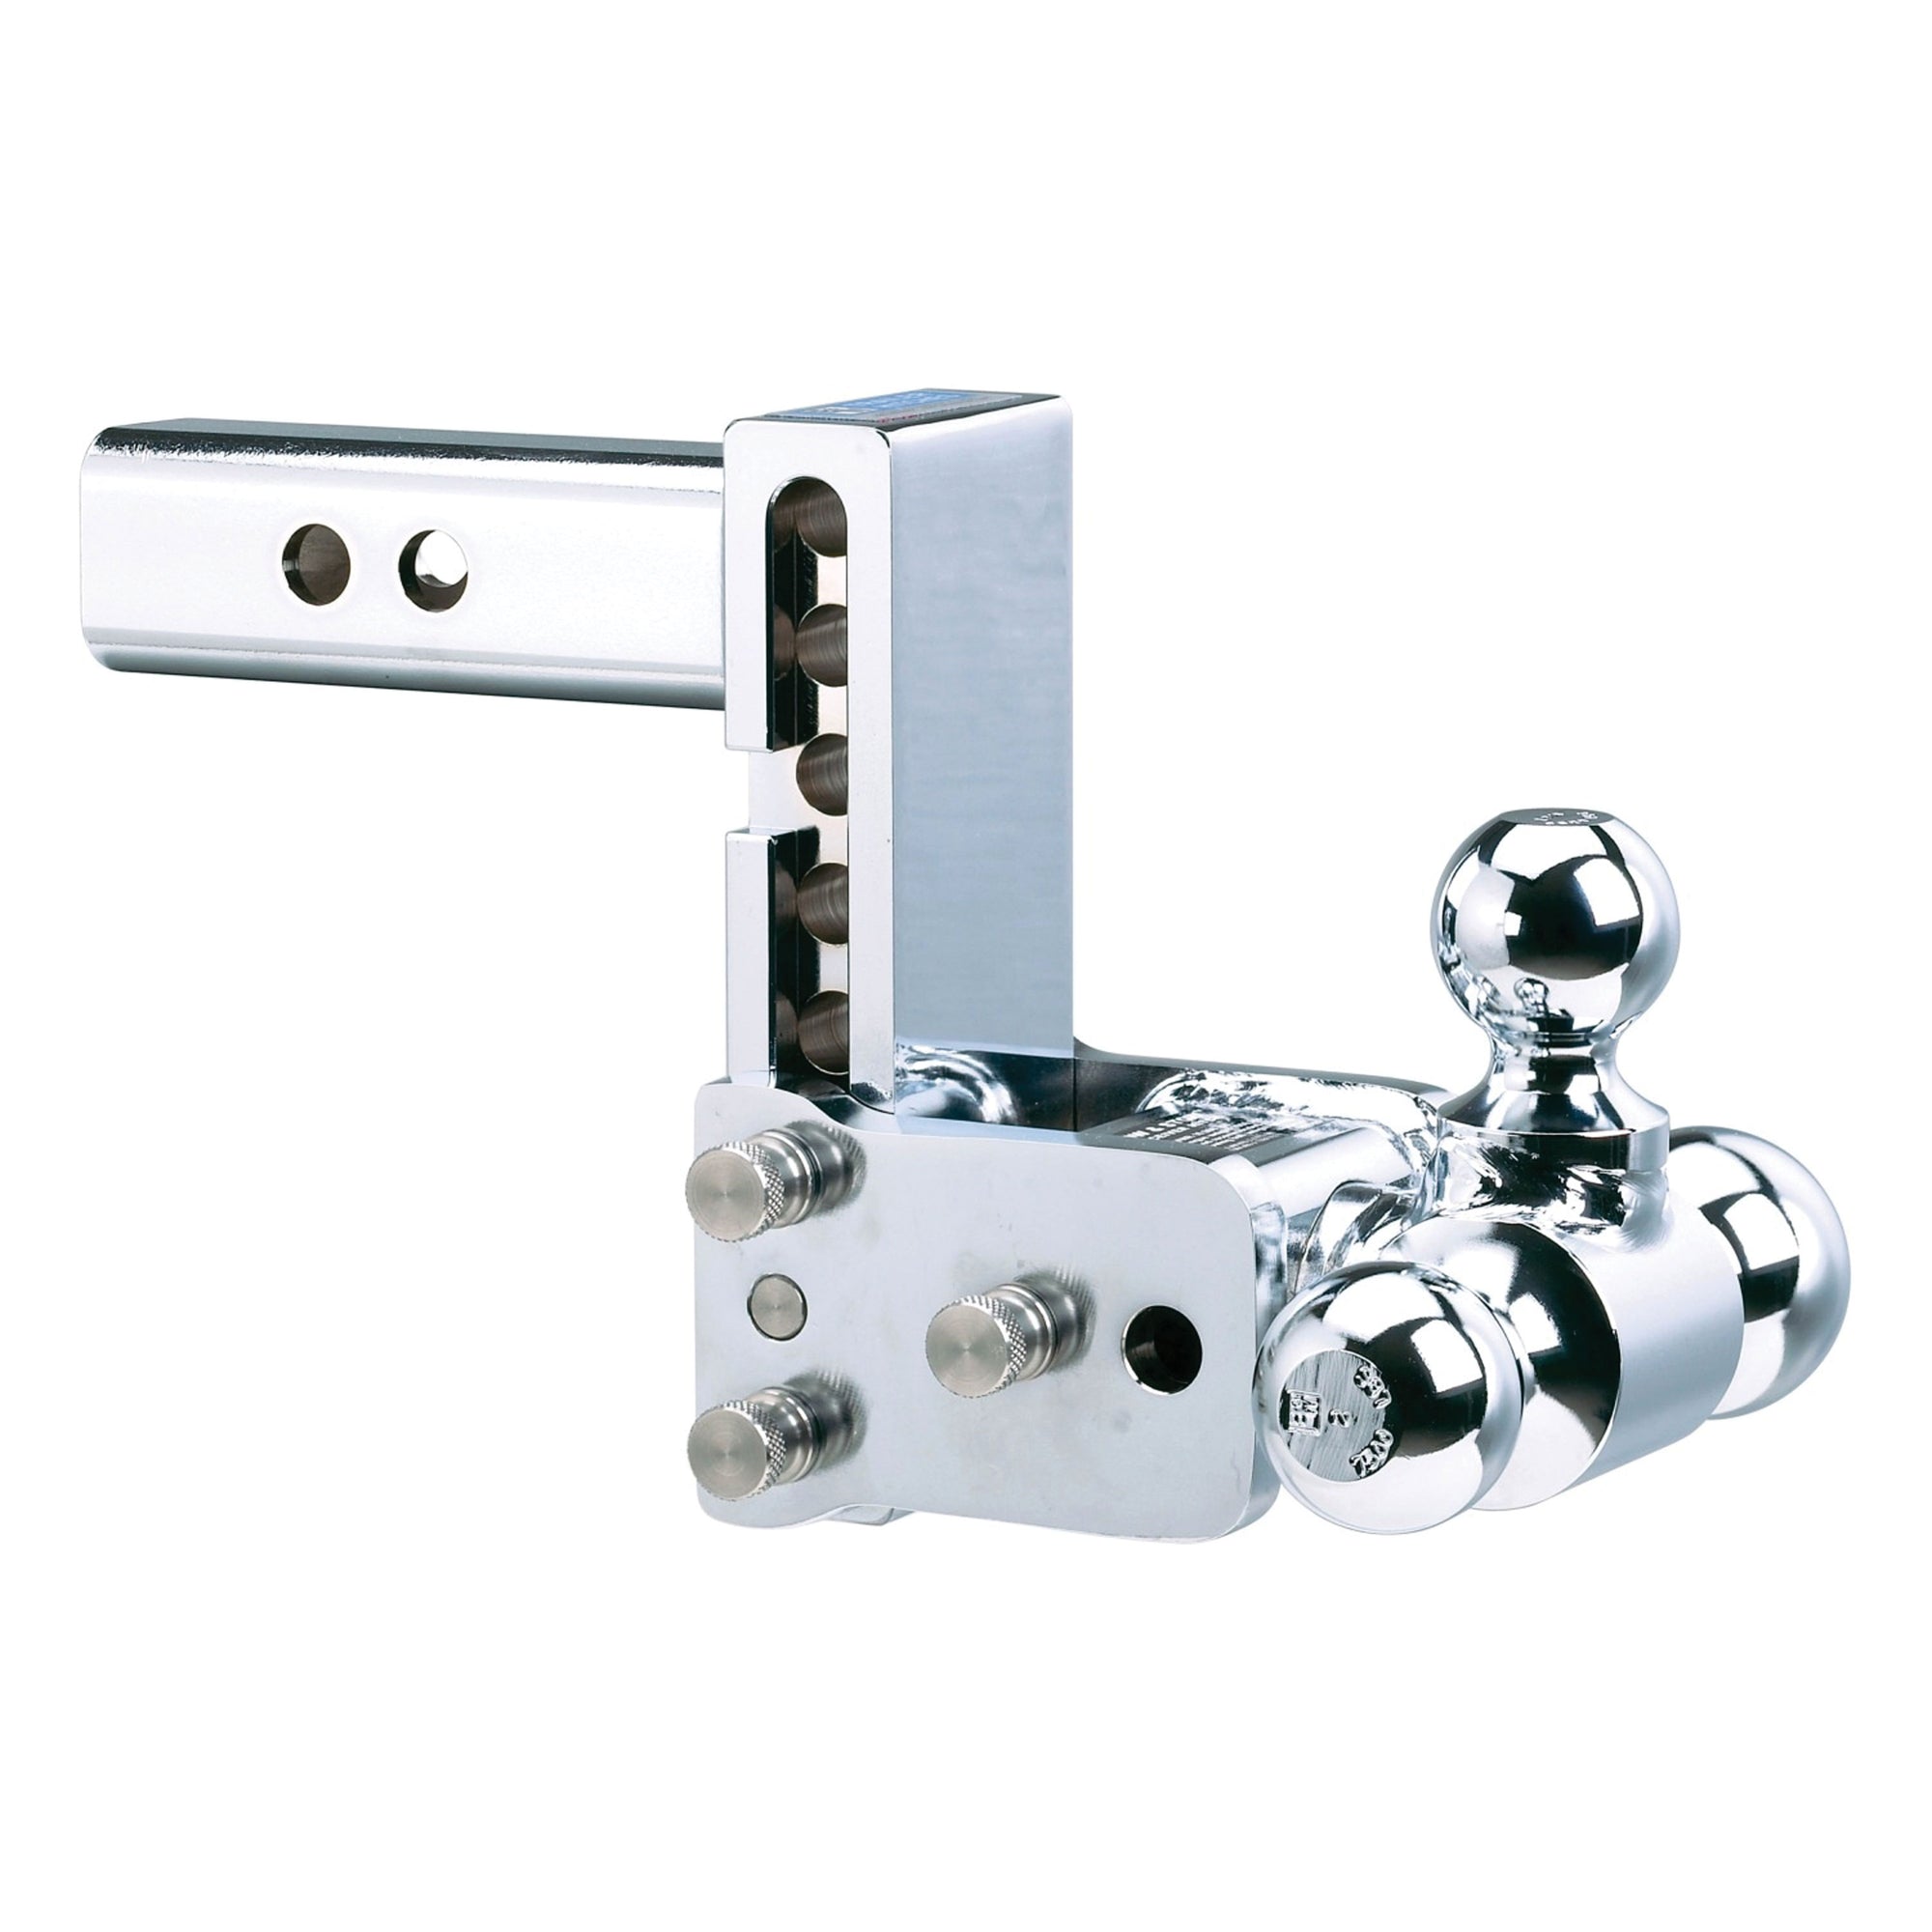 B&W Trailer Hitches TS20049C Tow and Stow Adjustable Ball Mount - 1-7/8", 2" & 2-5/16" Ball, 7" Drop, 7.5" Rise, Chrome